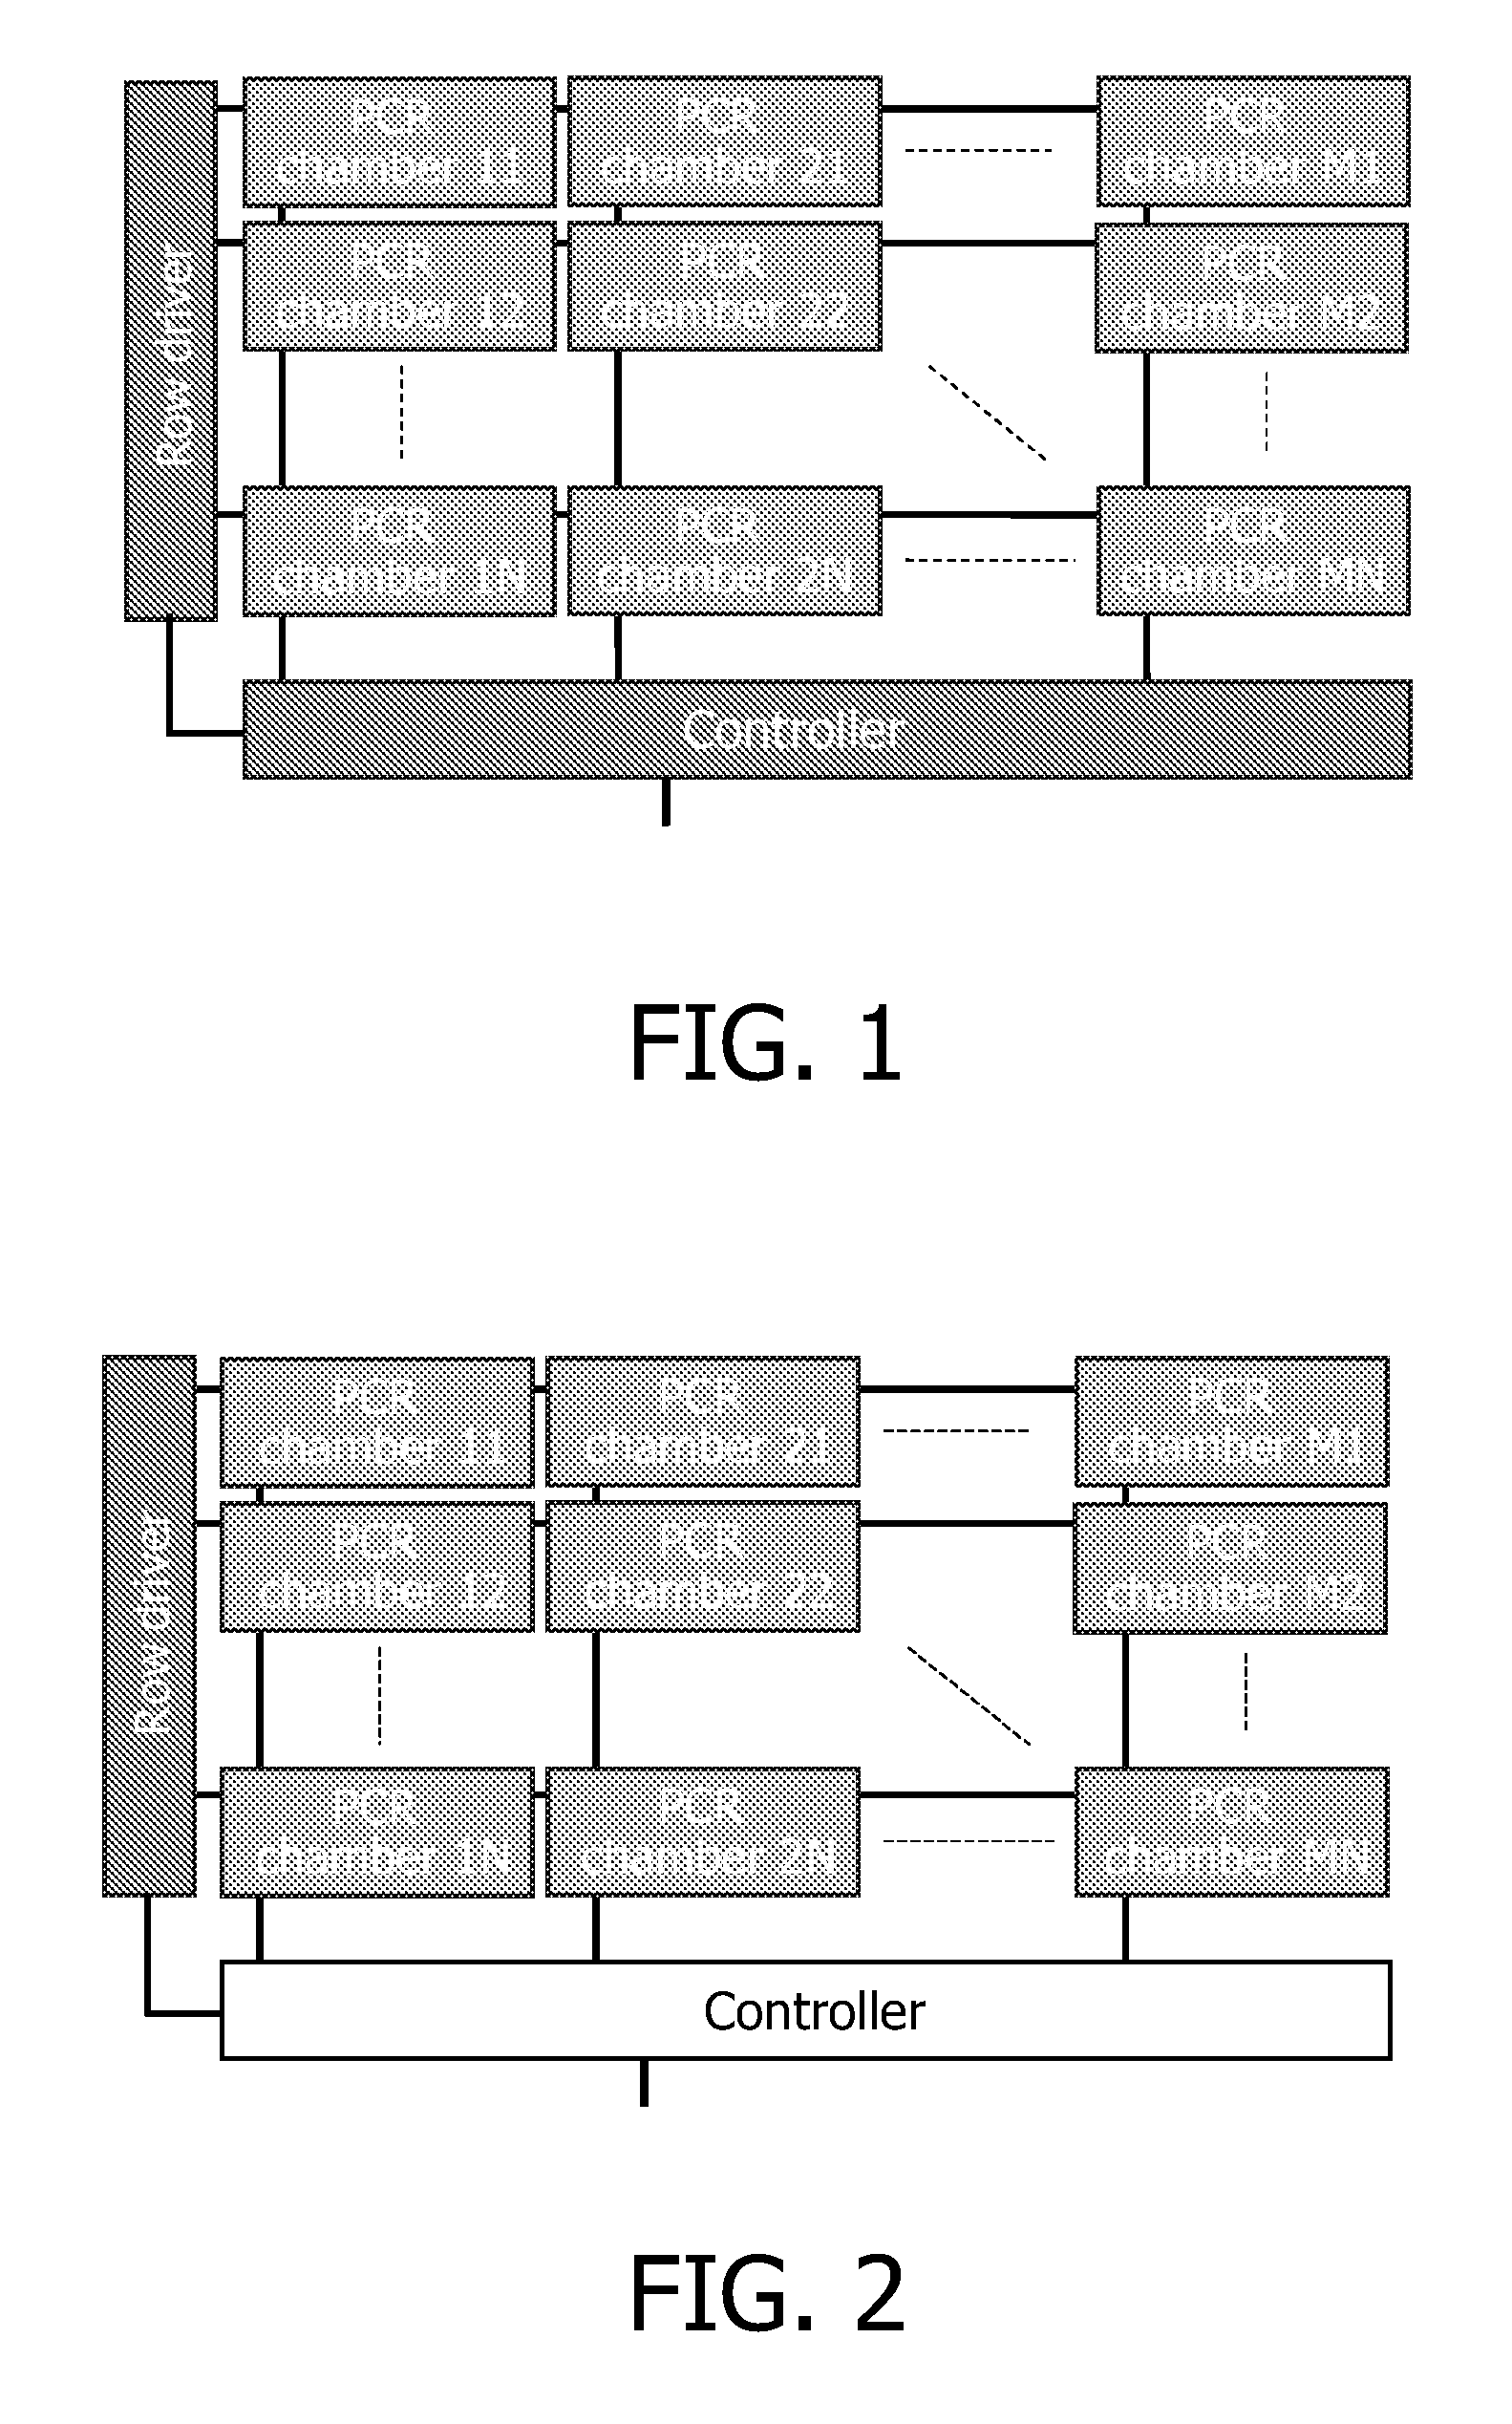 Integrated microfluidic device with reduced peak power consumption